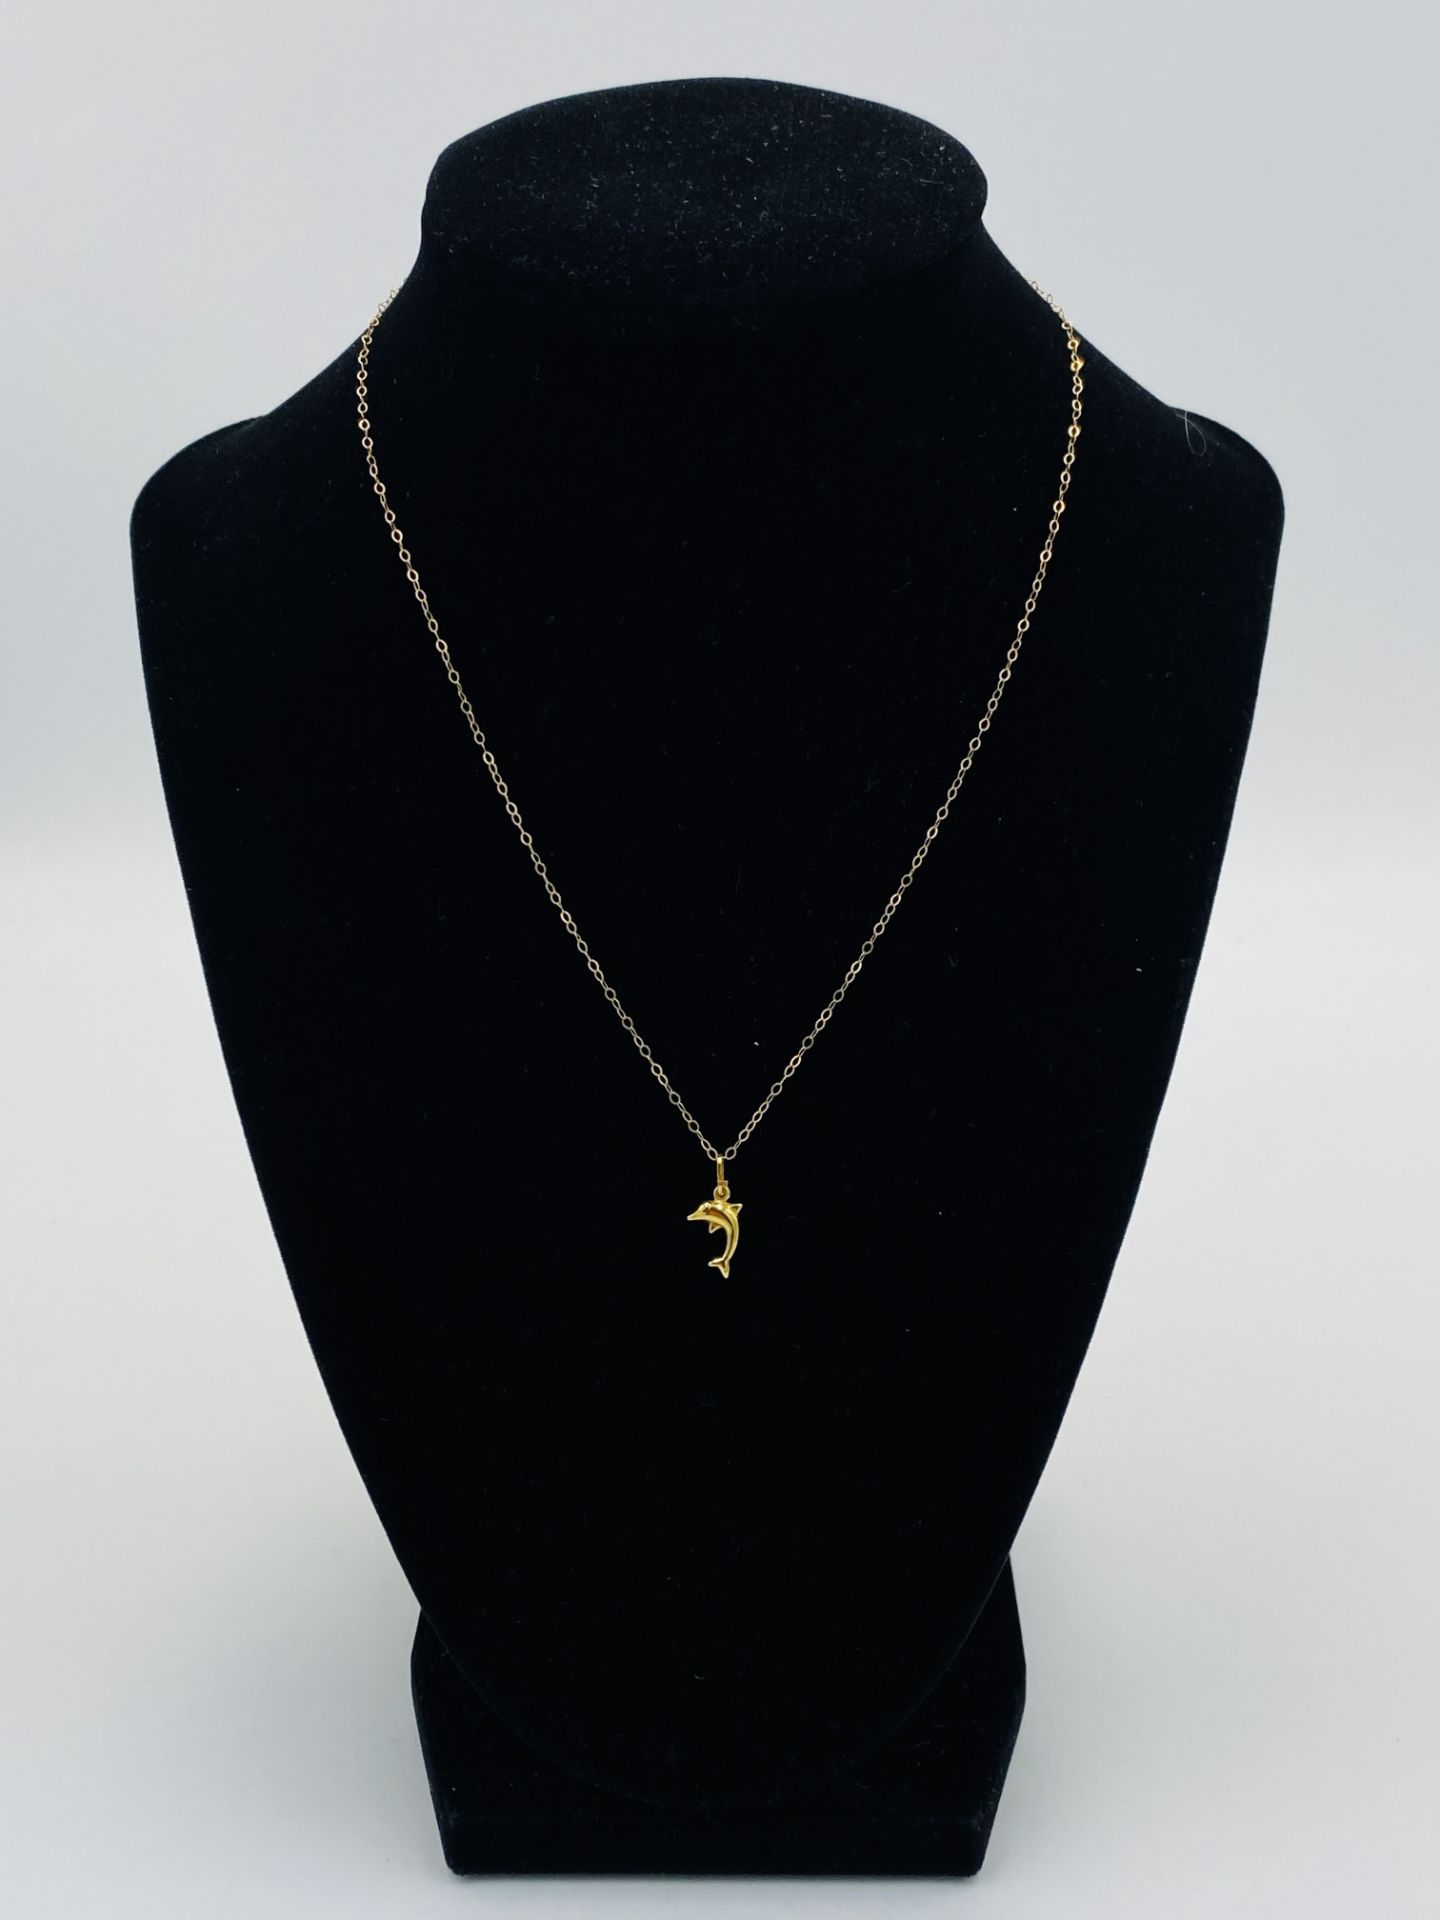 9ct gold necklace with dolphin pendant - Image 2 of 4